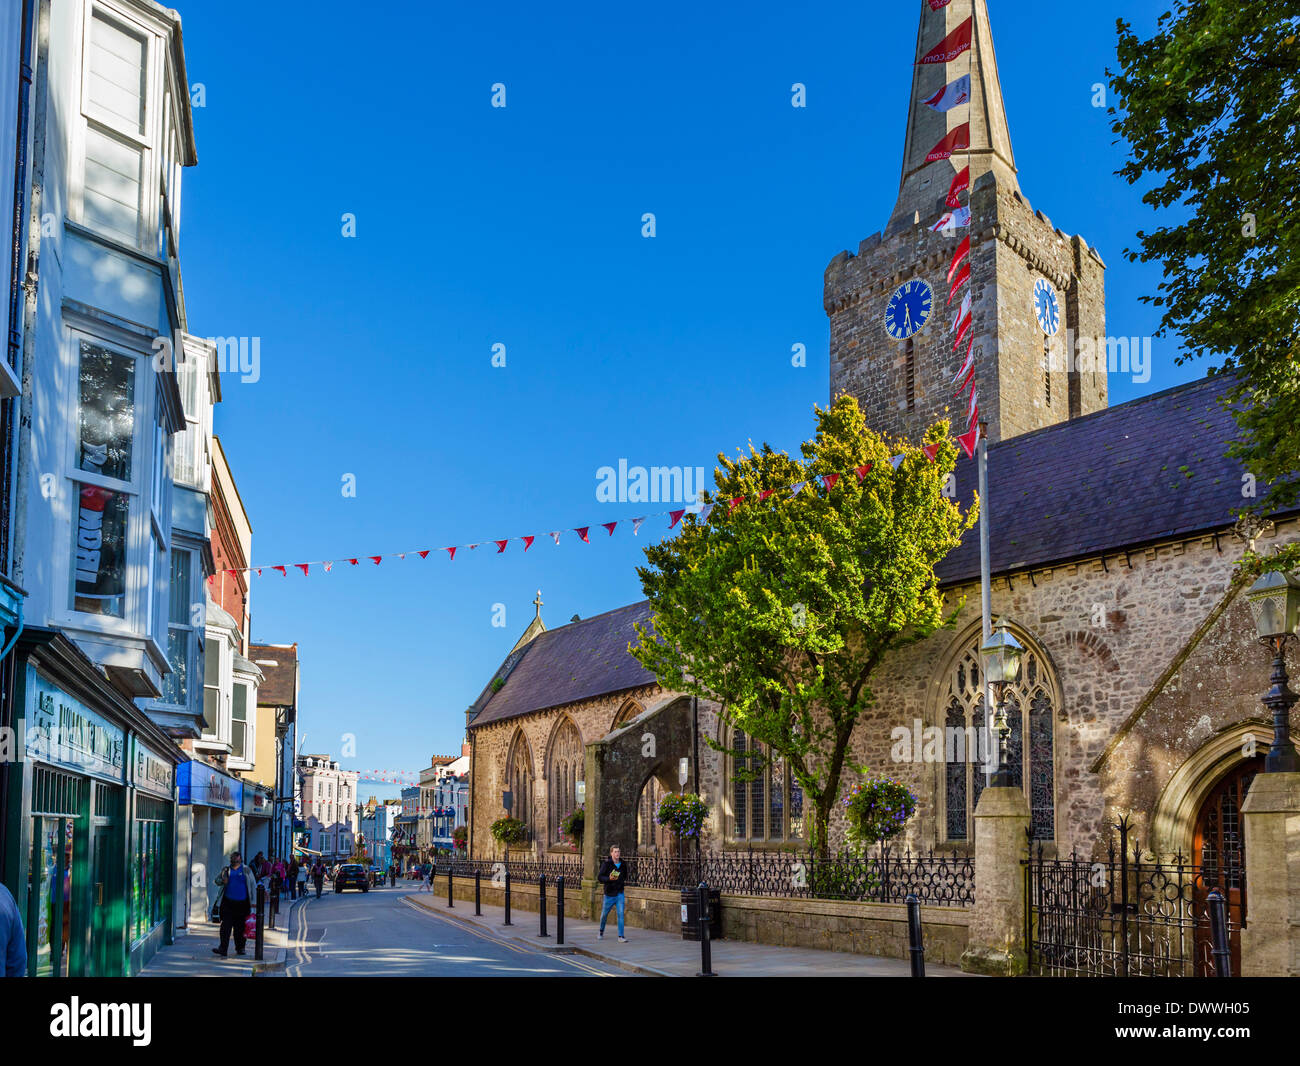 St Mary's Church on the High Street in the town centre, Tenby, Pembrokeshire, Wales, UK Stock Photo